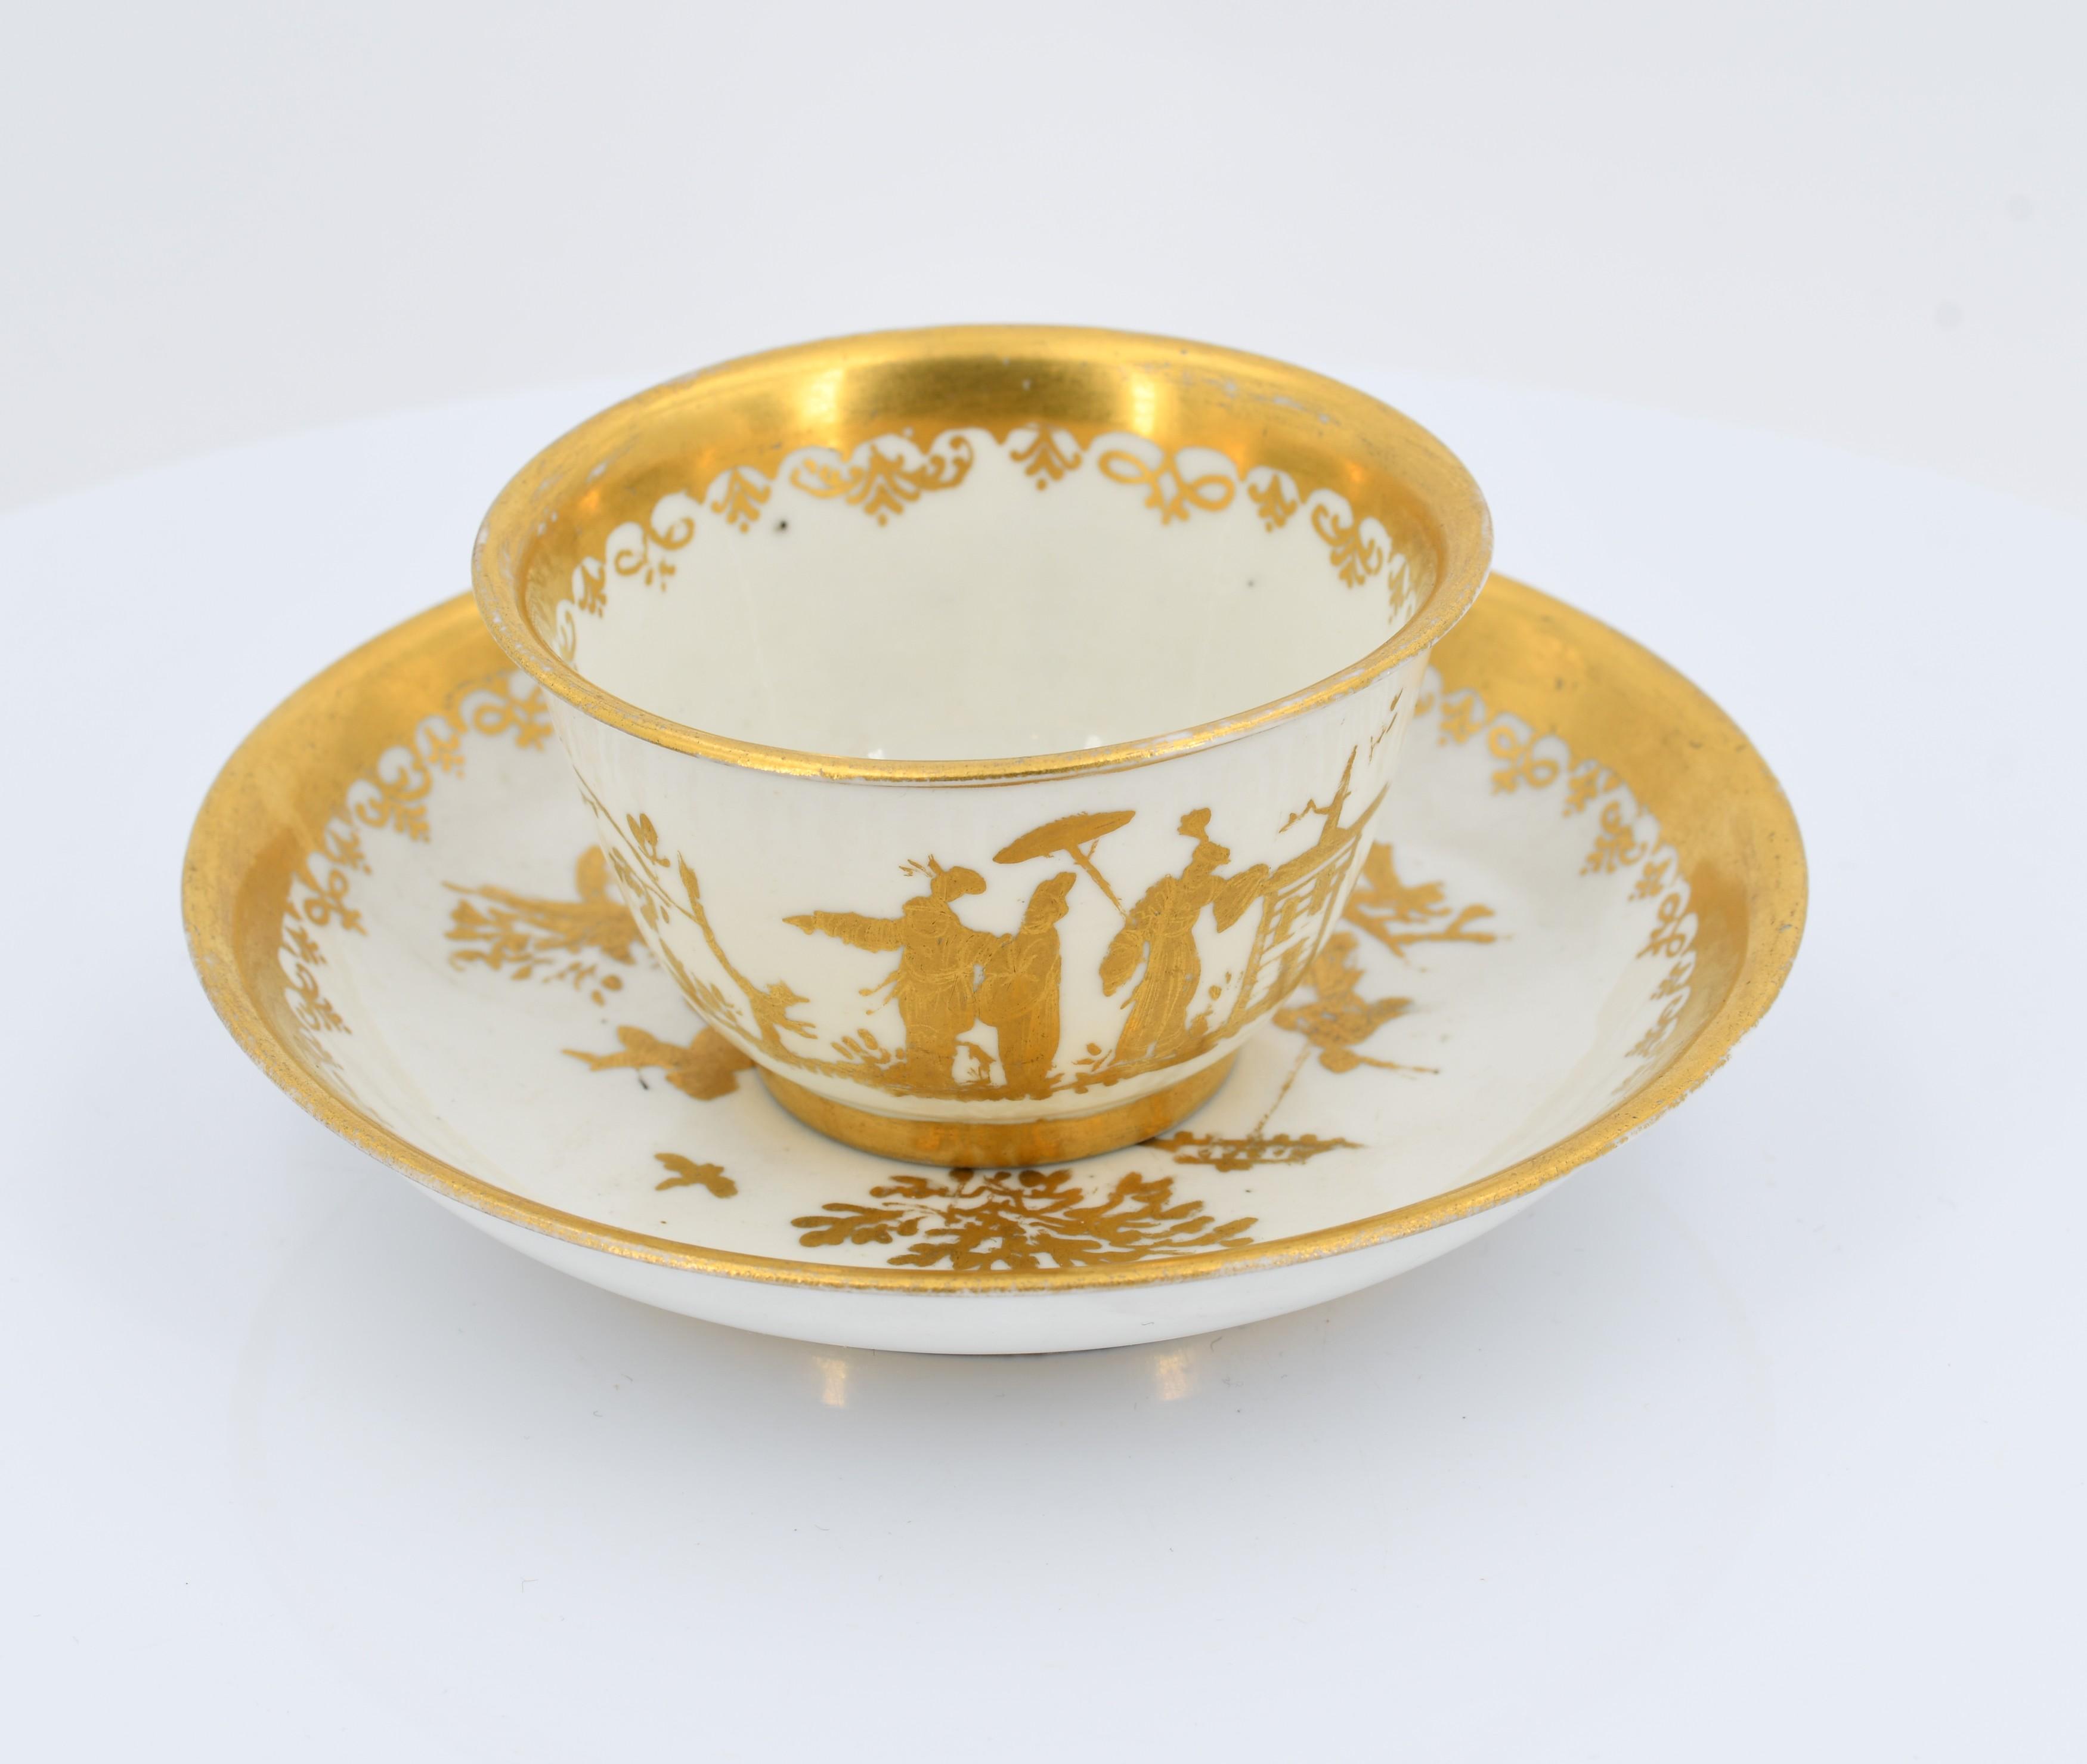 Tea bowl and saucer with gold Chinese décor - Image 4 of 7